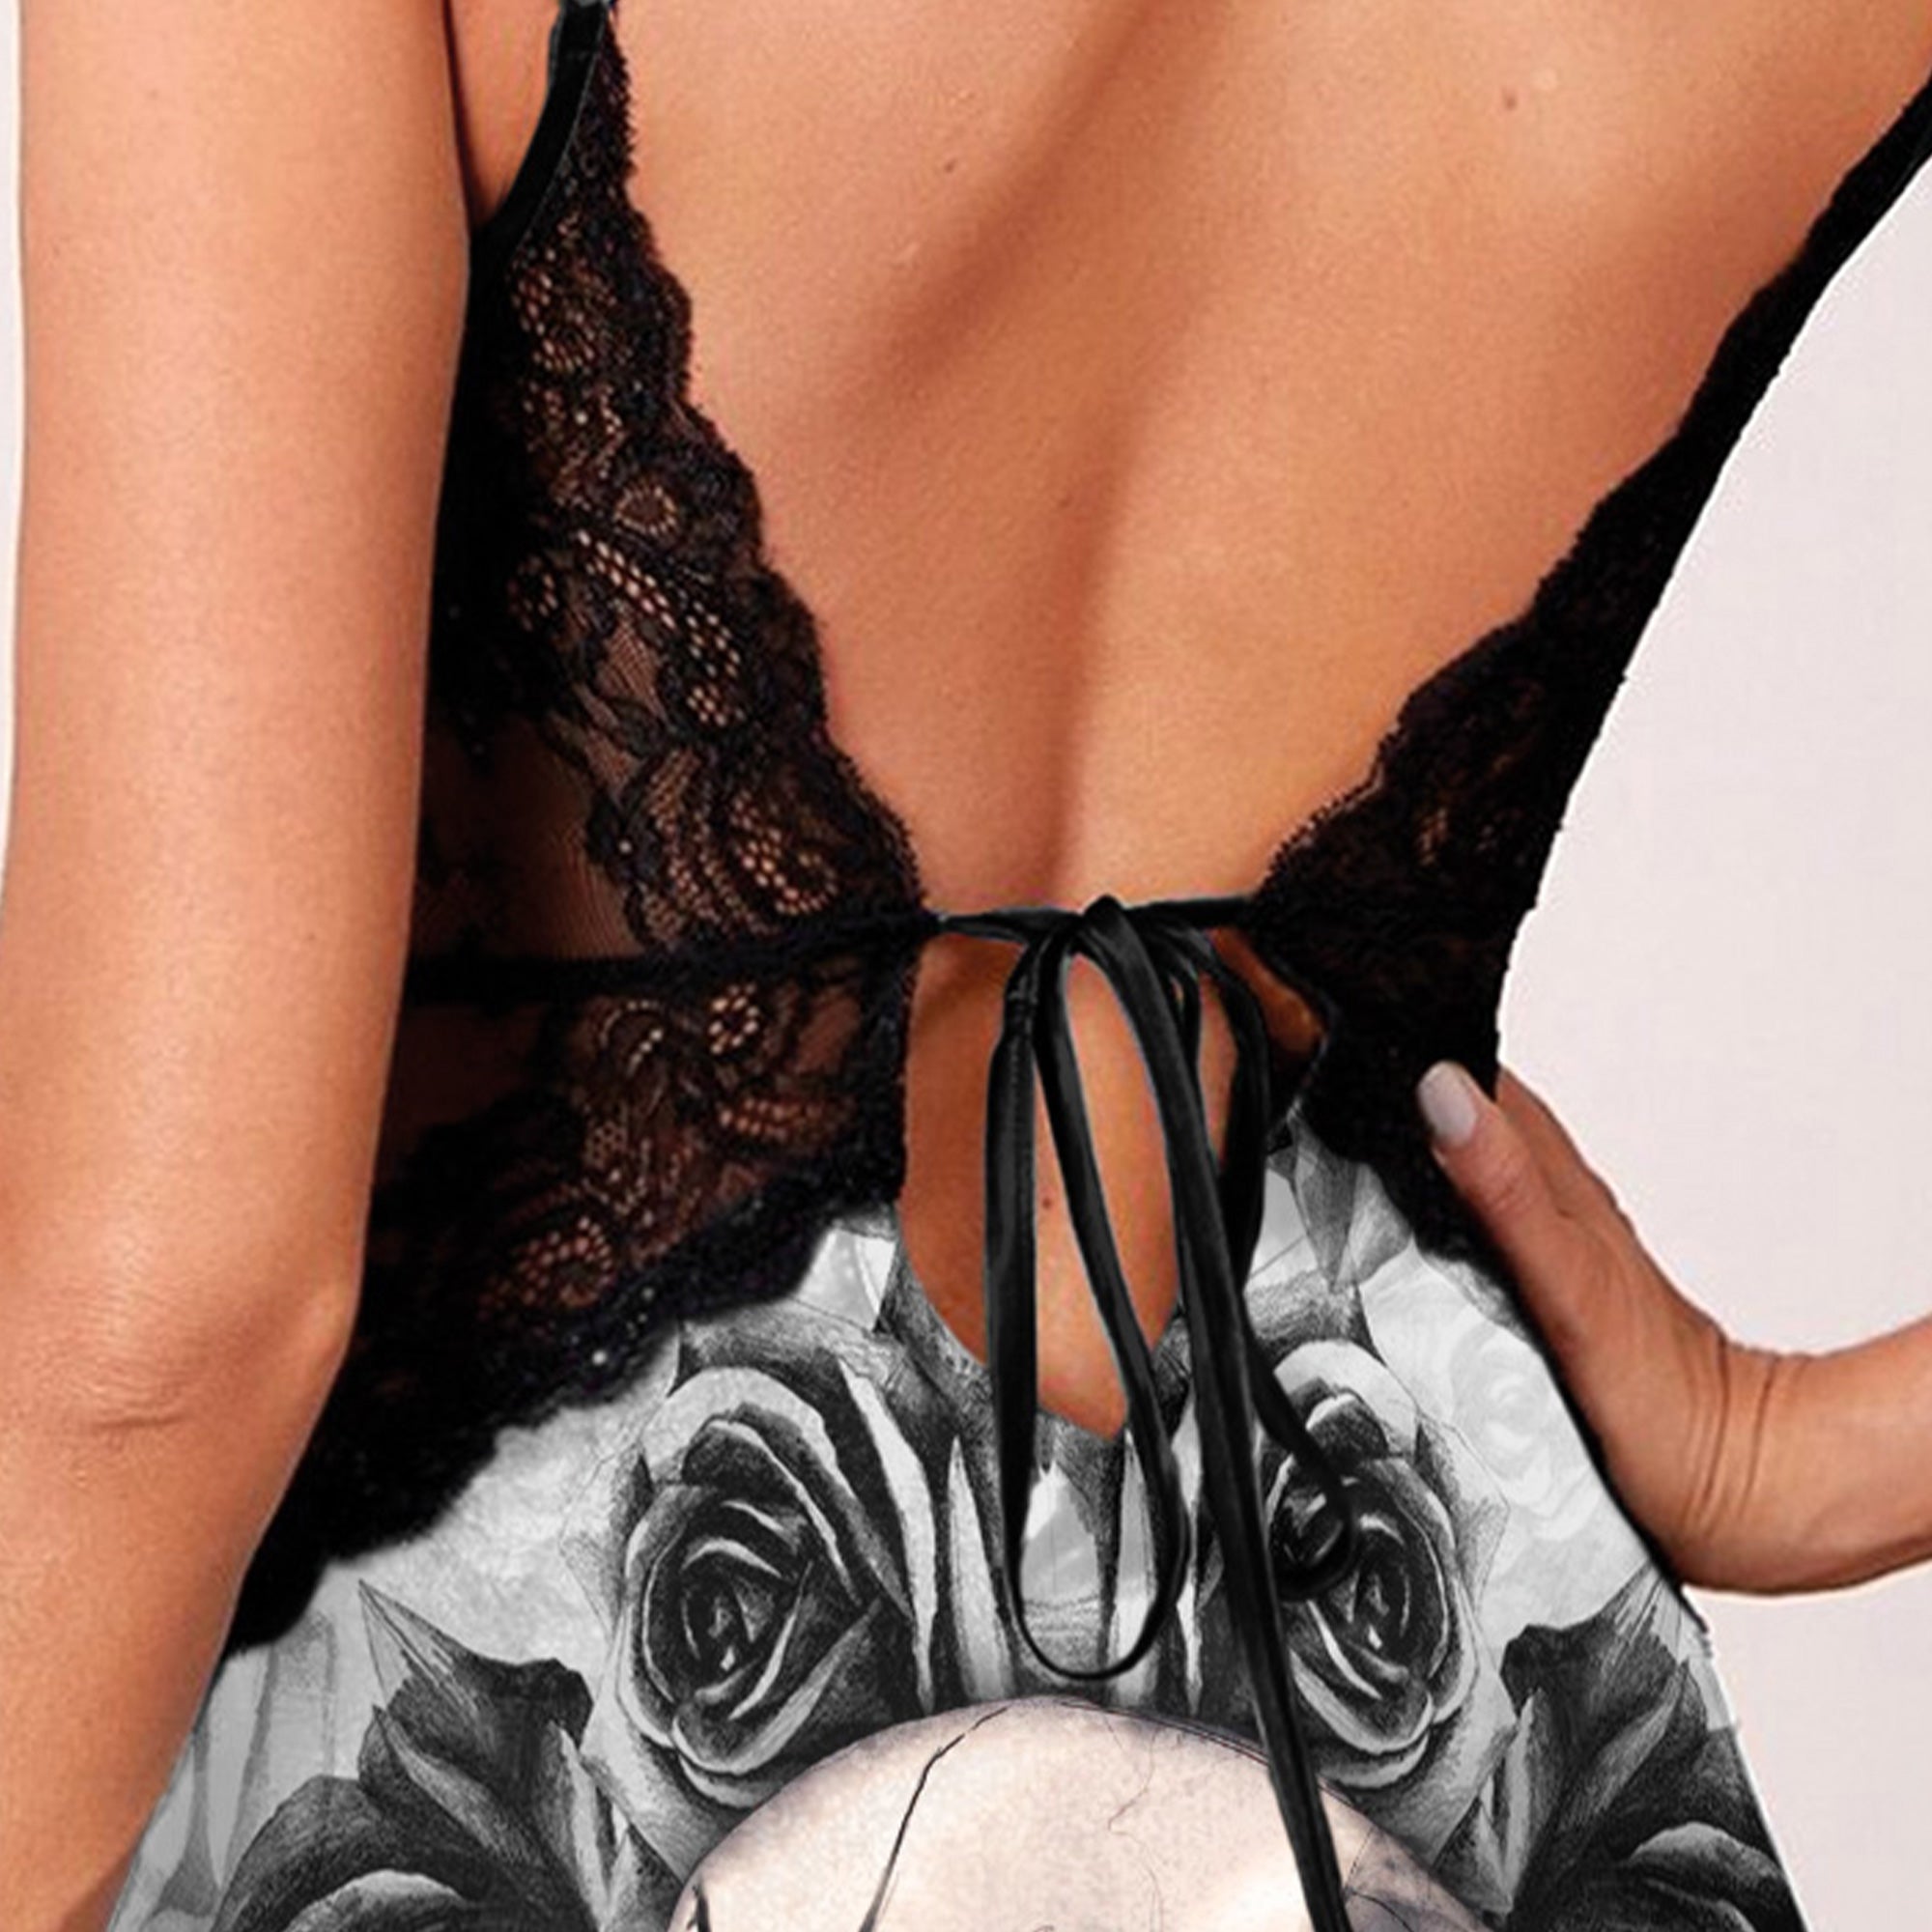 Skull Abstract Rose Gothic & Punkrock Women's Sleepwear | Lace Cami Dress Nightgowns